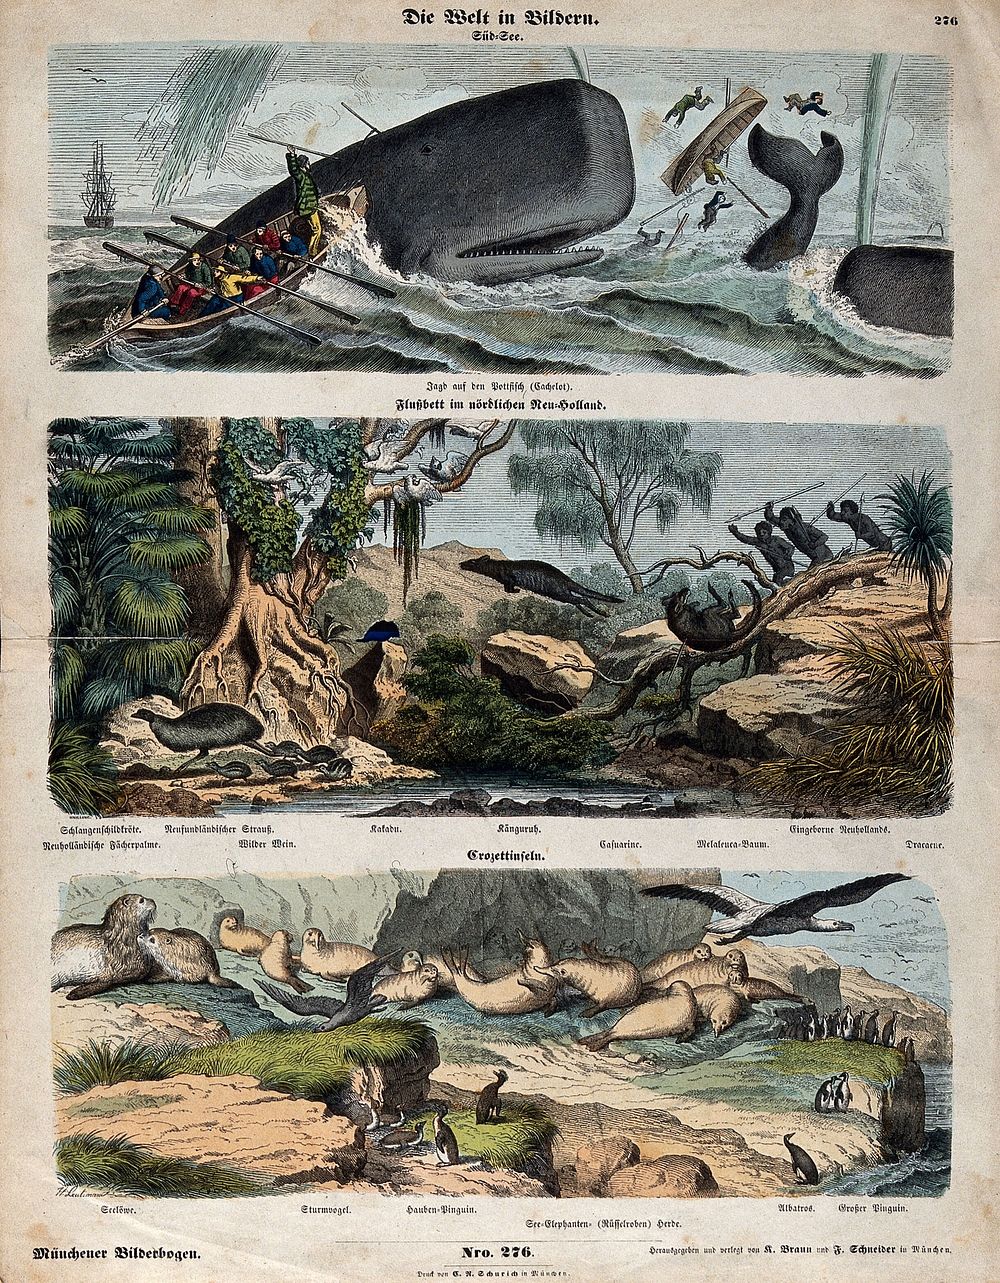 Above, fishermen hunting a spermwhale; middle, indigenous huntsmen hunting kangaroos; below, an island populated by petrels…